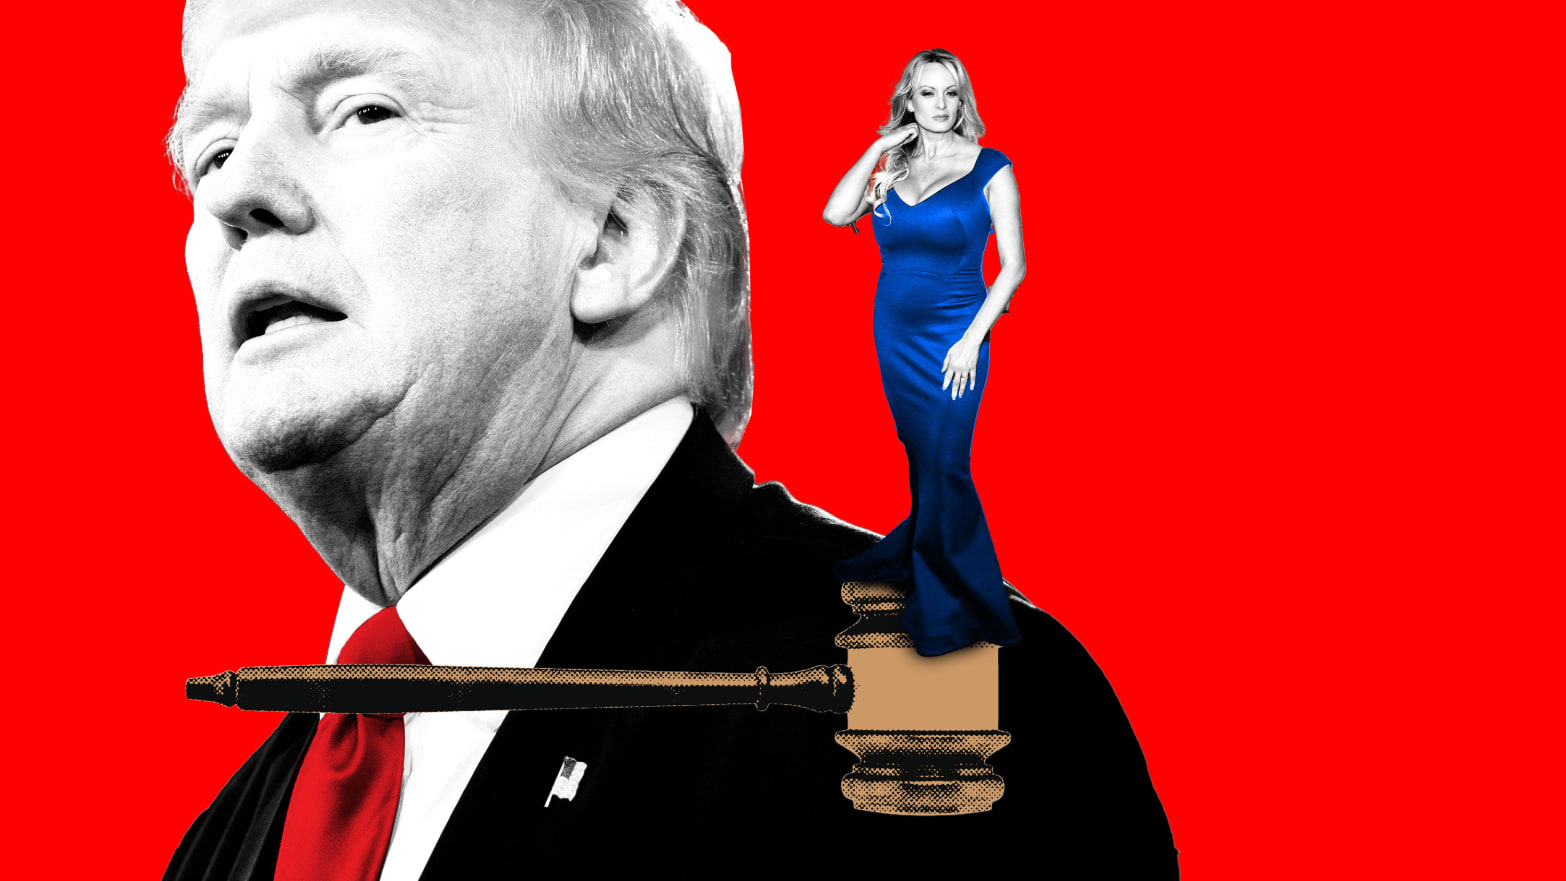 A photo illustration of Donald Trump behind Stormy Daniels standing on a gavel